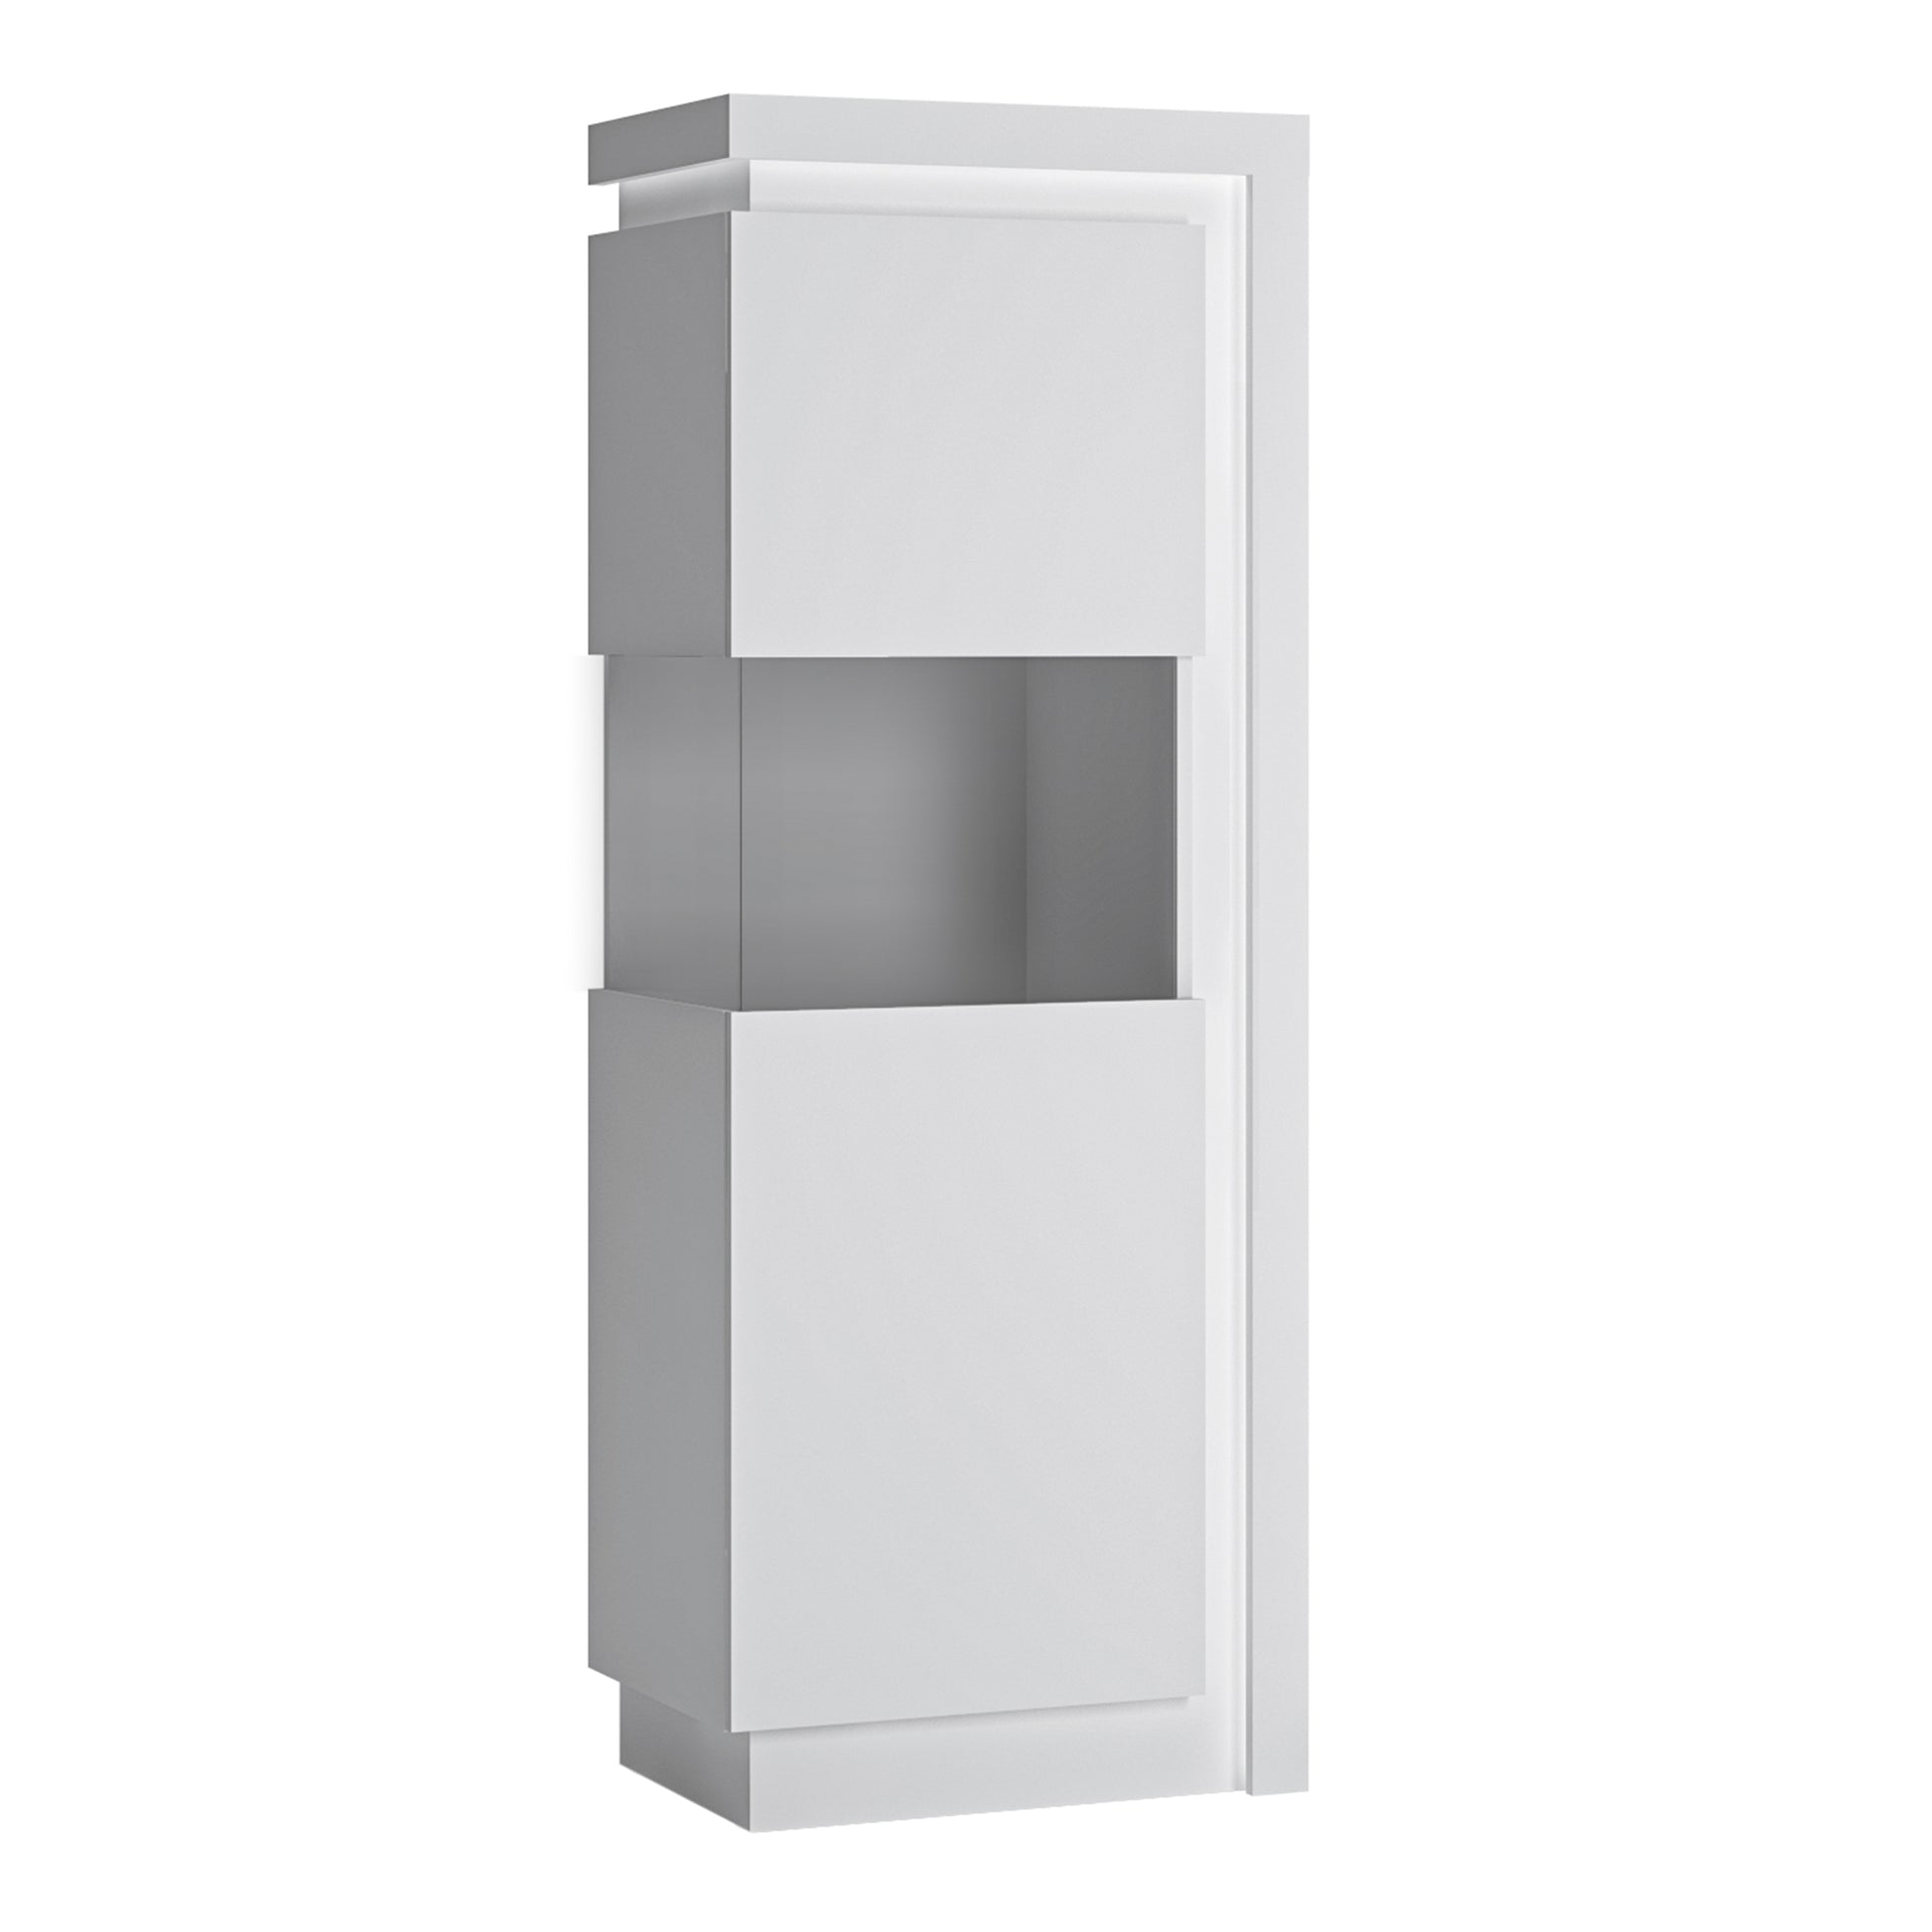 Lyon  Narrow display cabinet (LHD) 164.1cm high (including LED lighting) in White and High Gloss